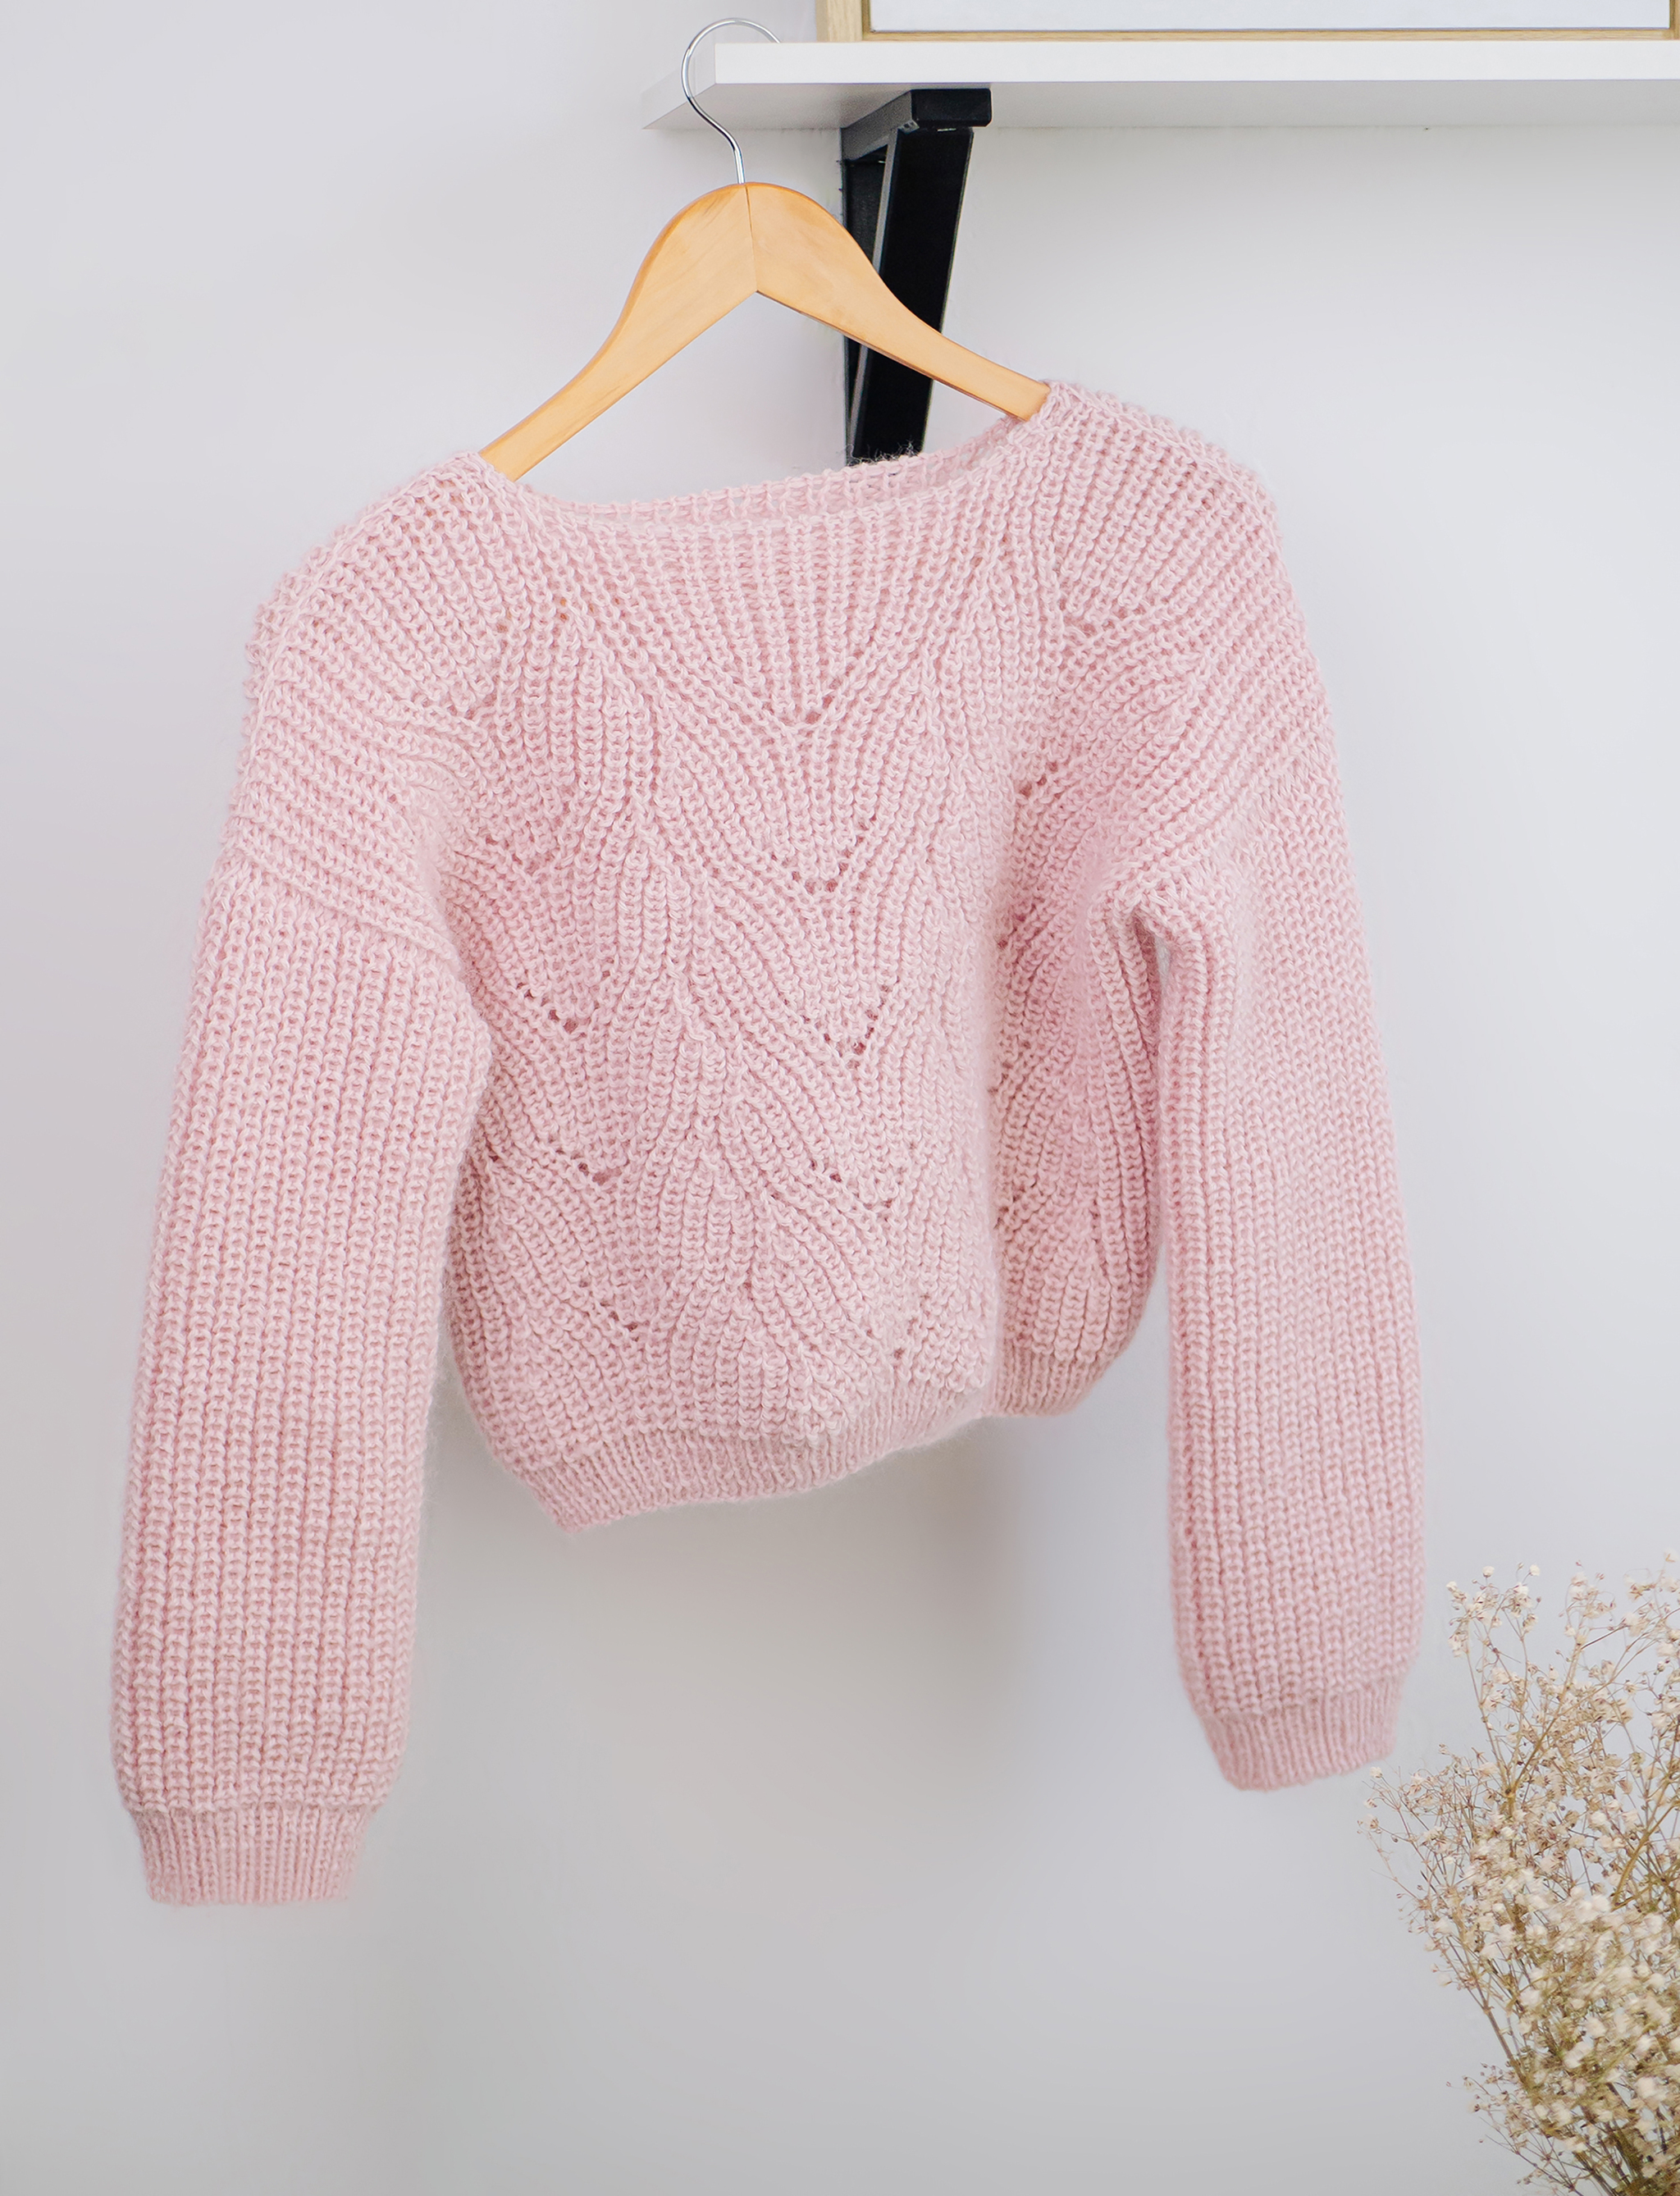 Reversible knitted sweater - My, Handmade, Knitting, Needlework without process, Longpost, Cloth